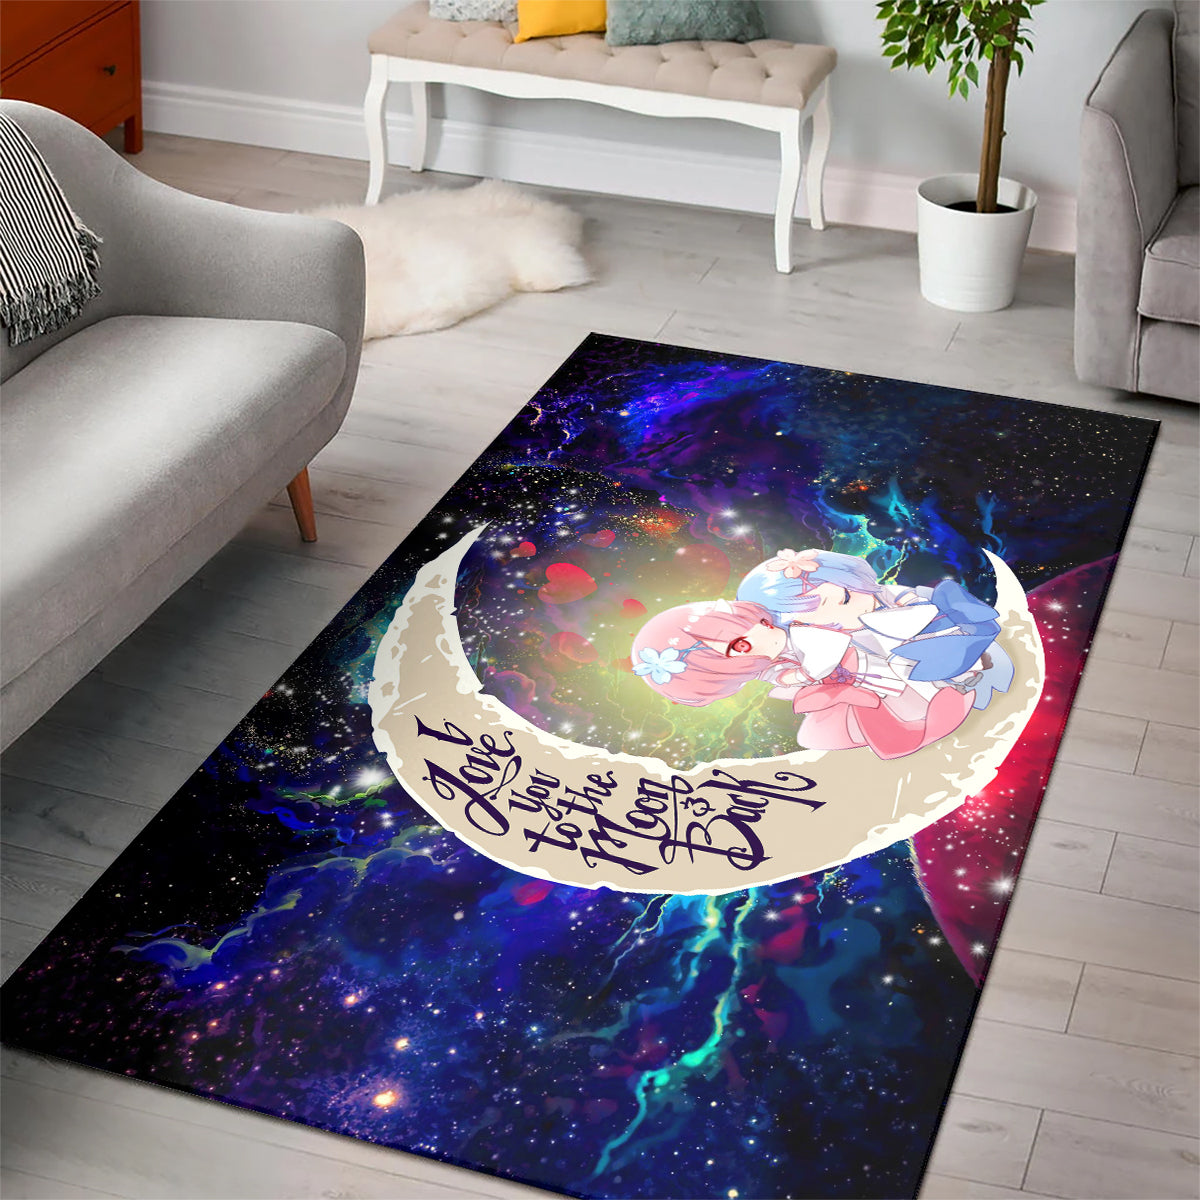 Ram And Rem Re Zero Love You To The Moon Galaxy Carpet Rug Home Room Decor